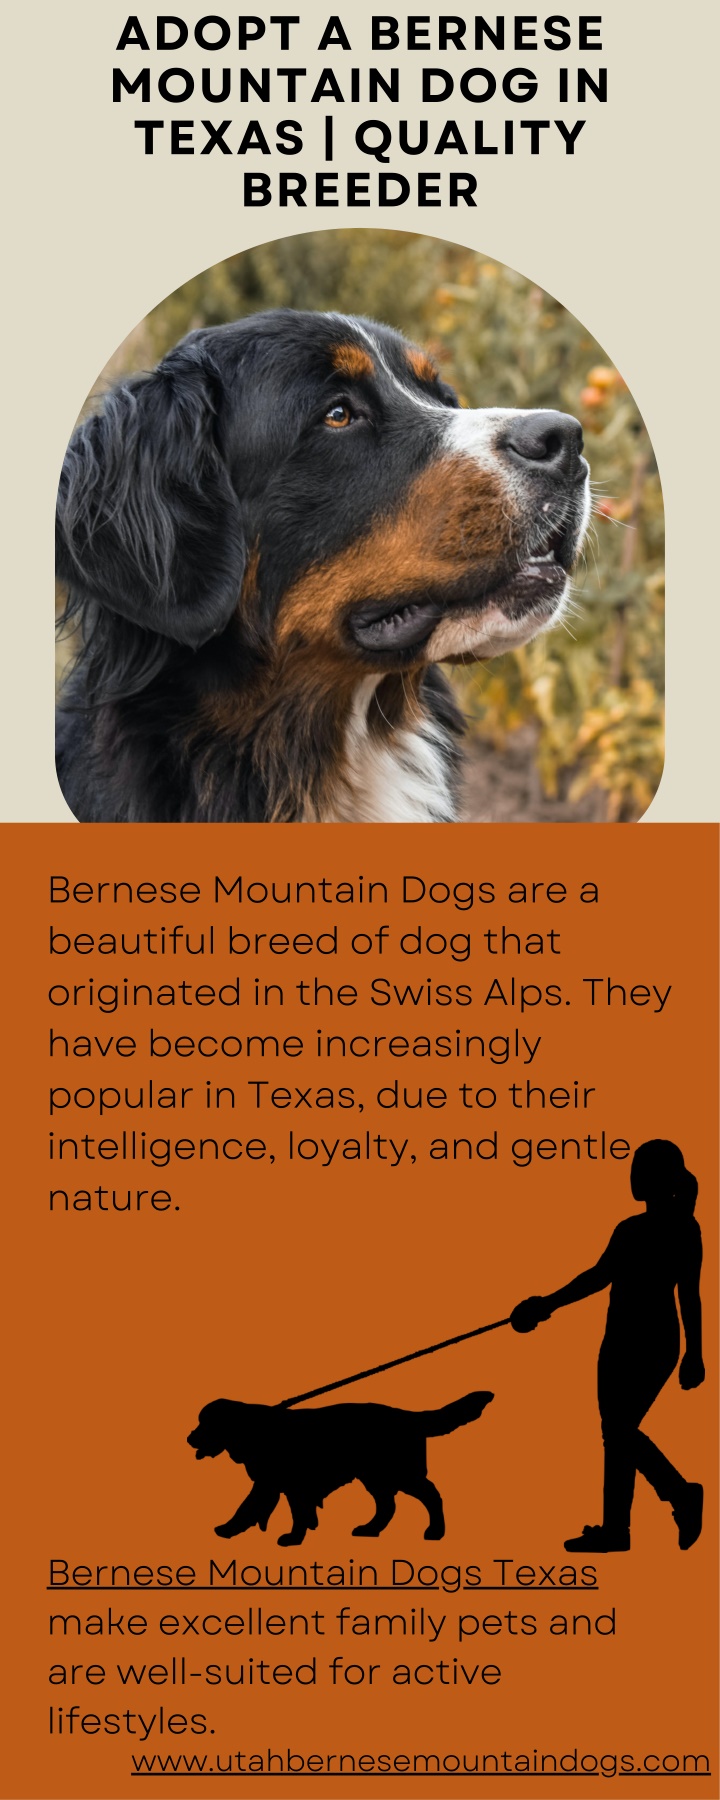 adopt a bernese mountain dog in texas quality